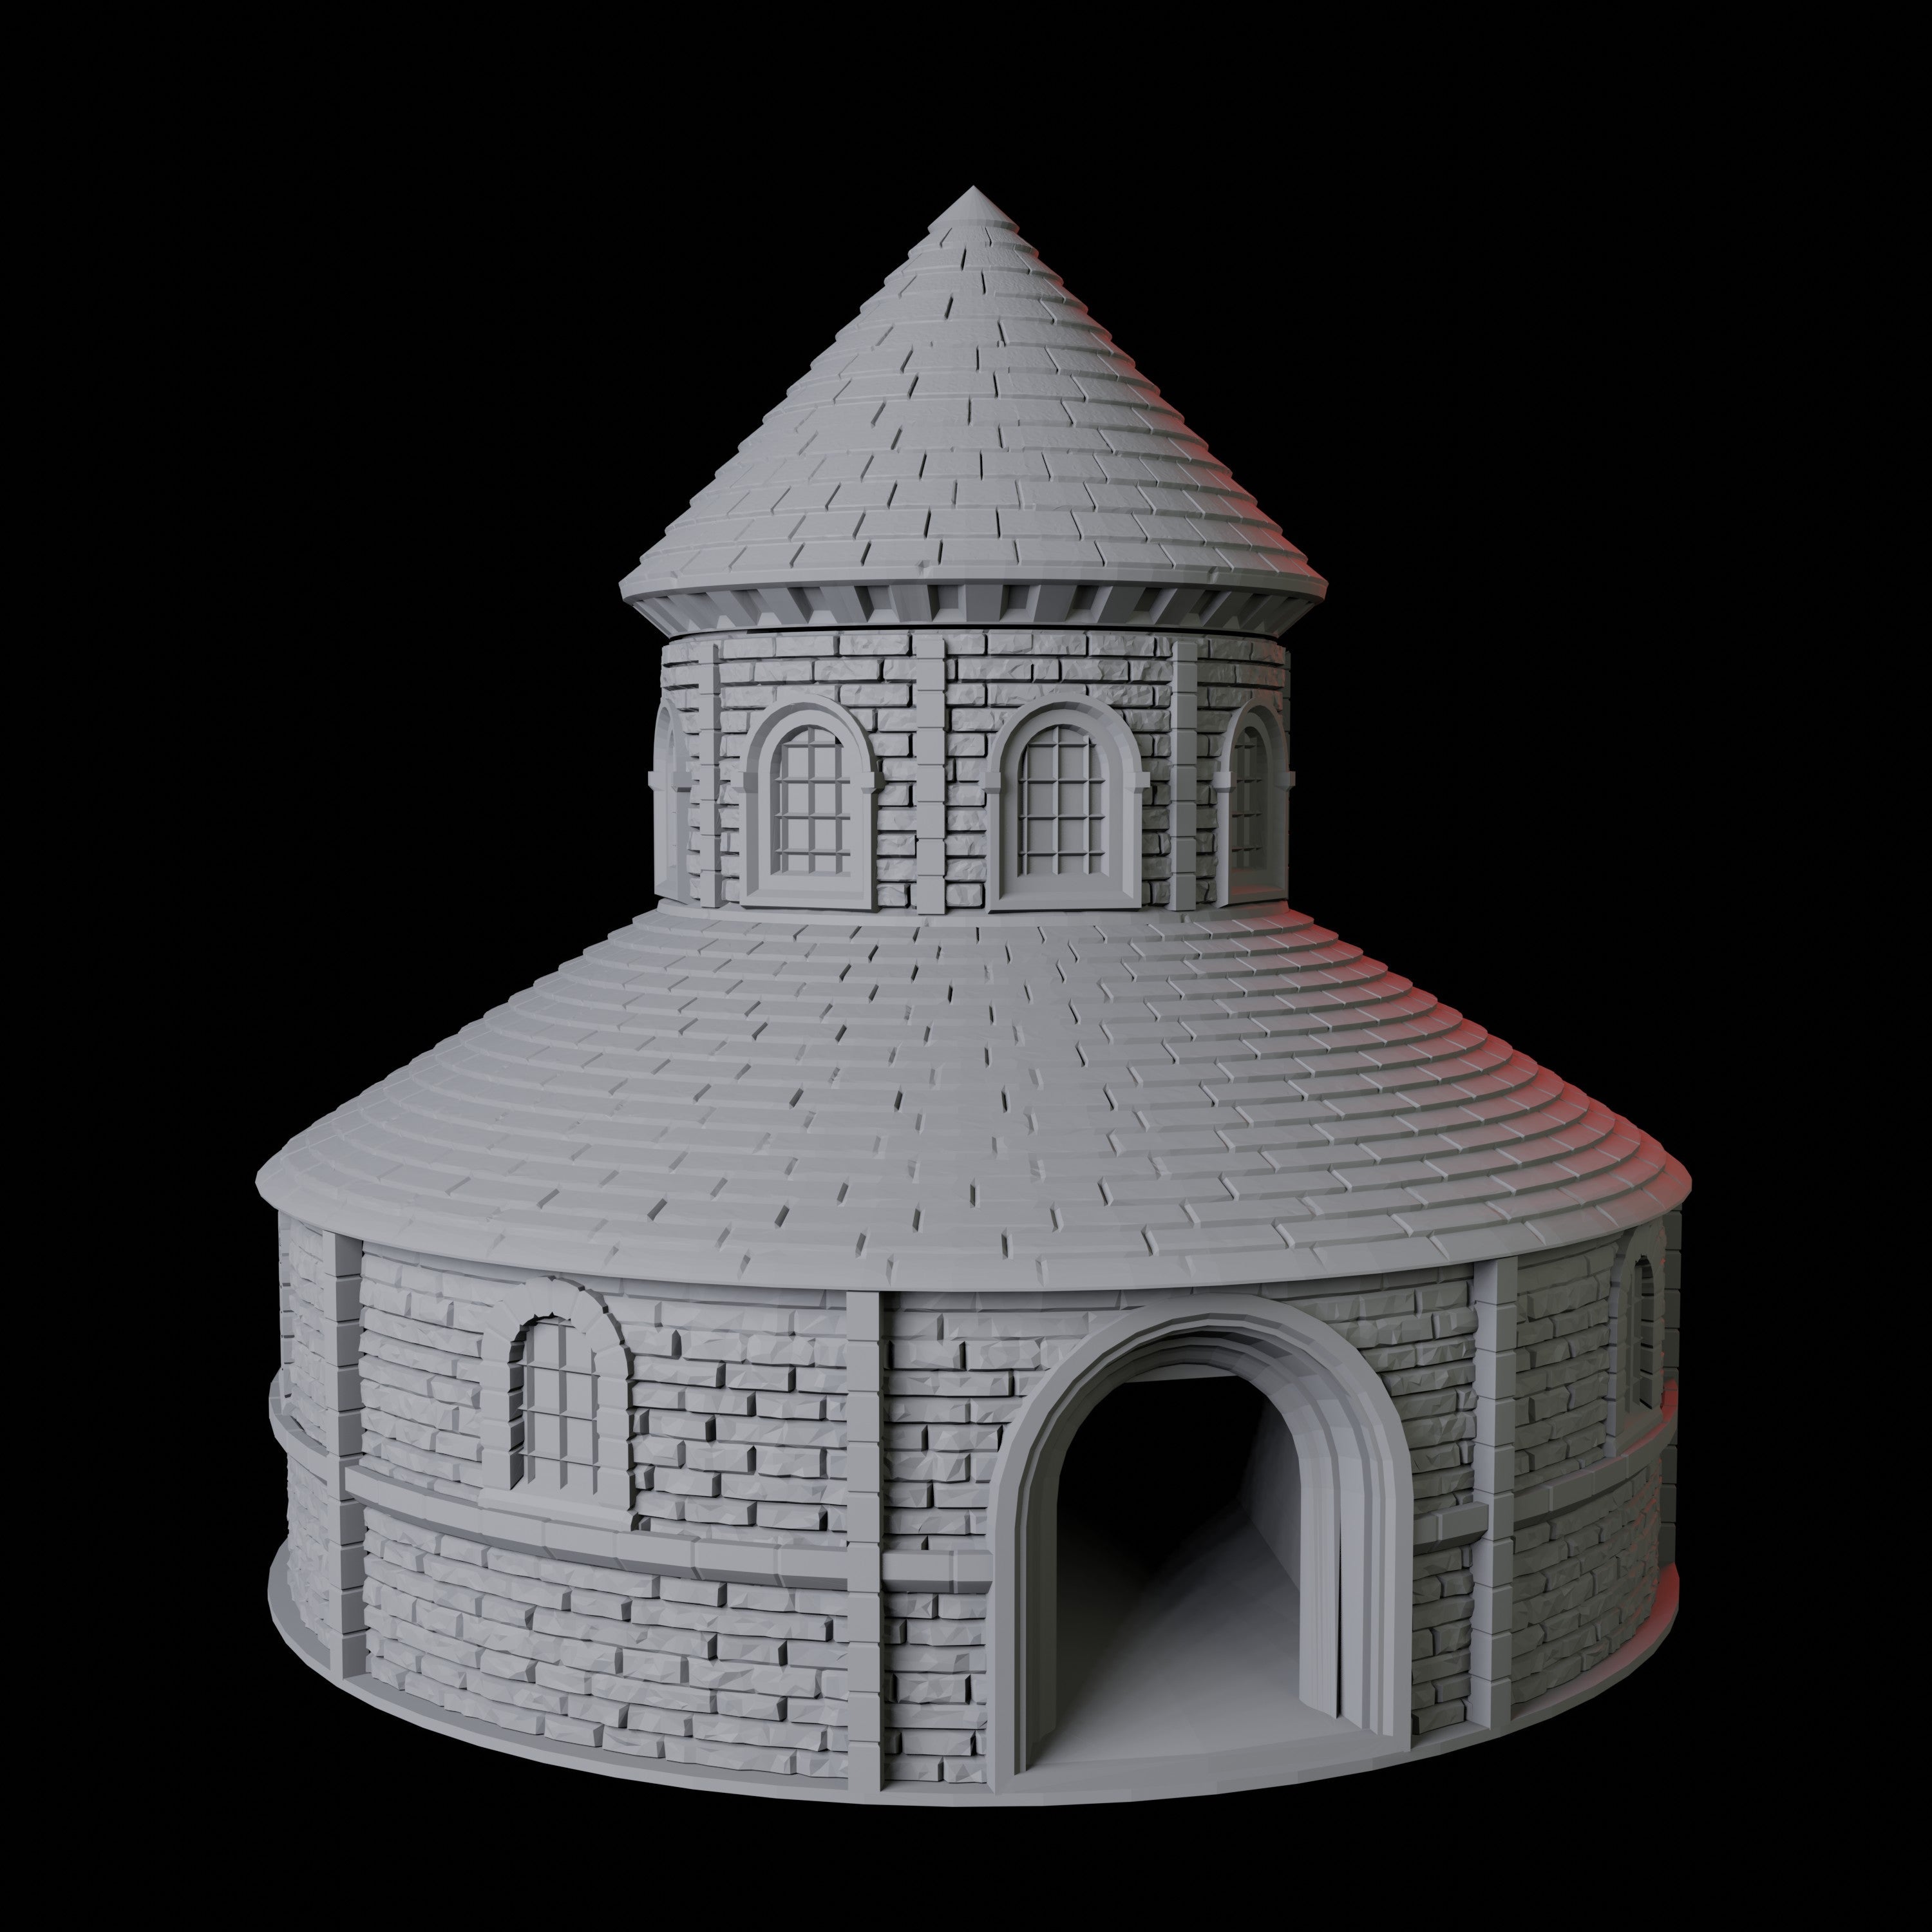 Round Church Dice Tower Miniature for Dungeons and Dragons